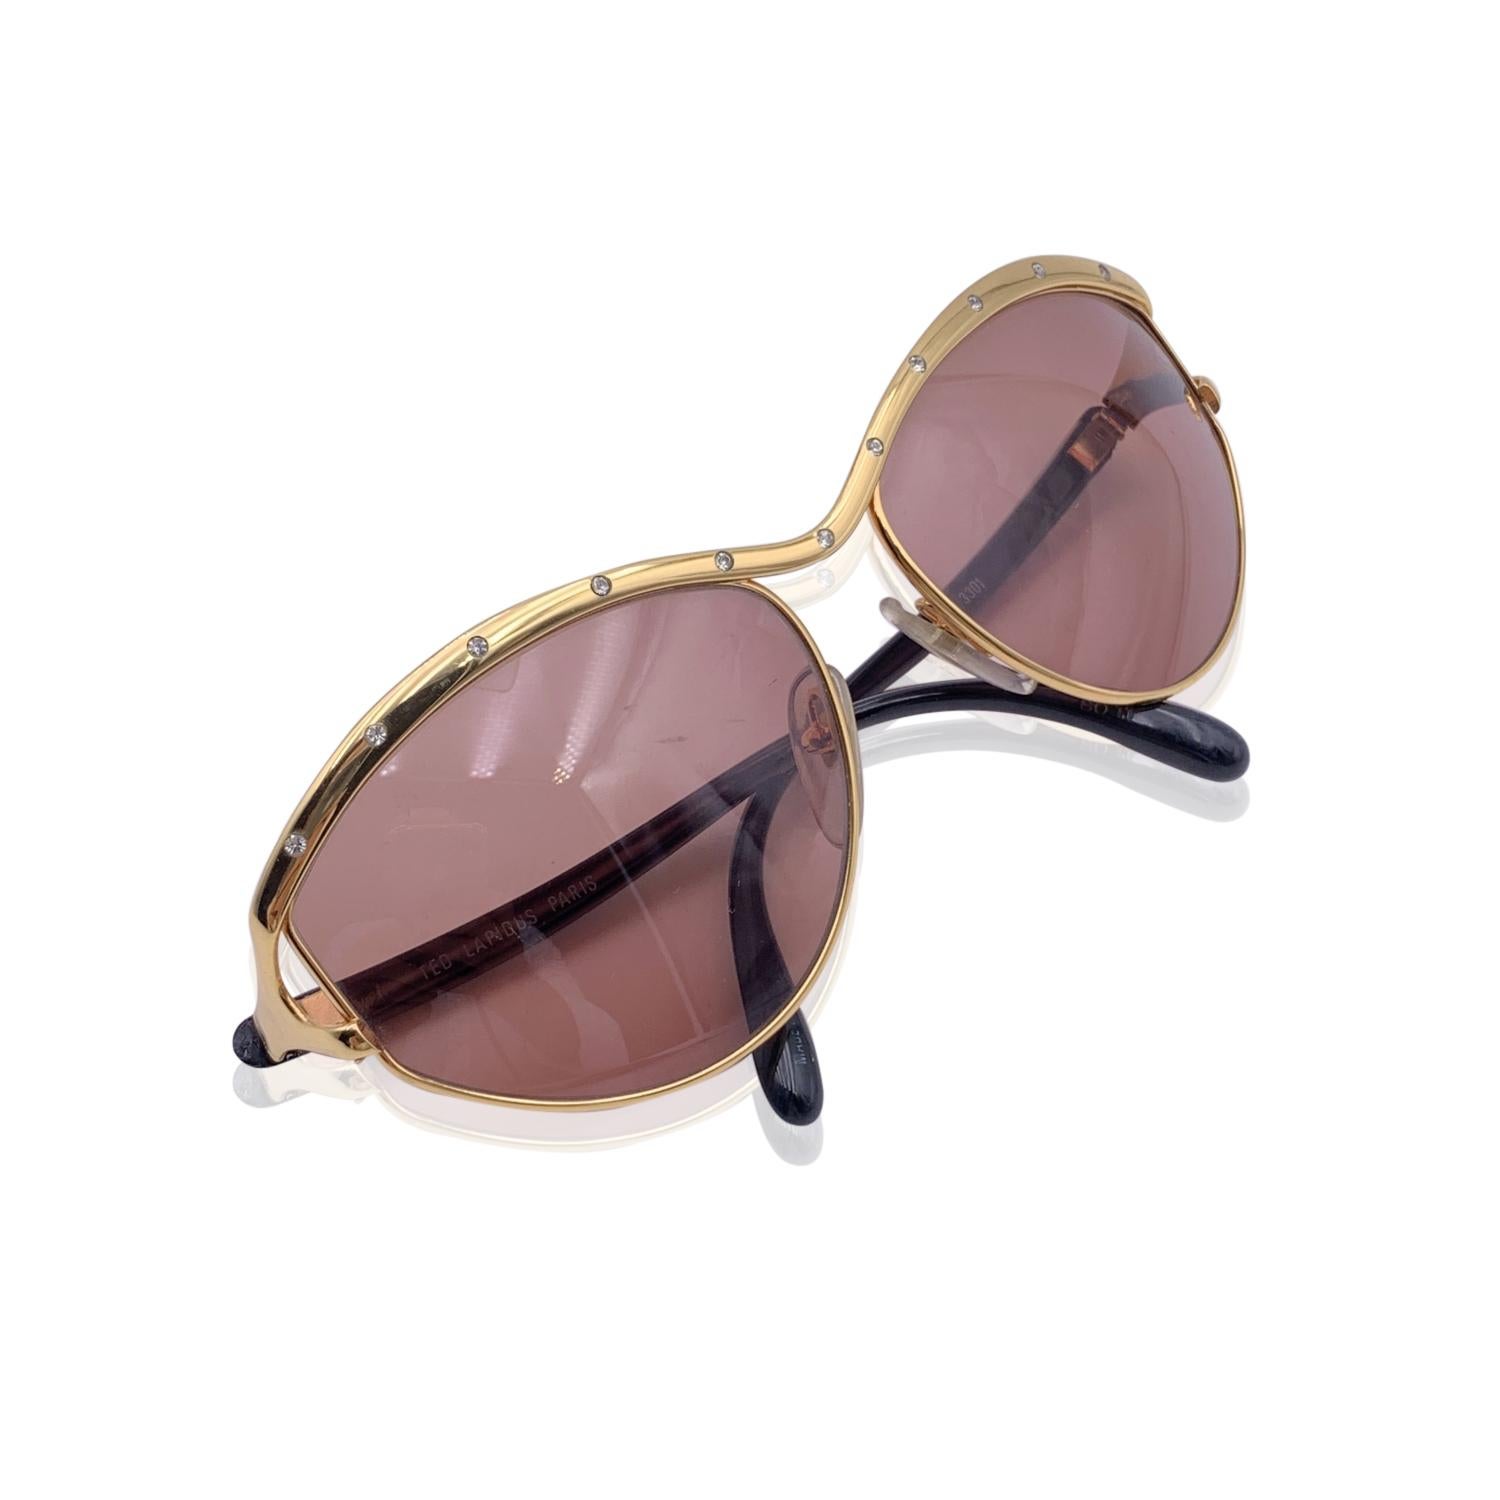 Oversized, gorgeous one-of-a-kind sunglasses by Ted Lapidus, Paris, mod. TL 3301. Gold metal frame with black acetate arms. Rhinestones finish on the top Brown original lenses.

Details

MATERIAL: Metal

COLOR: Gold

MODEL: TL 3301

GENDER: